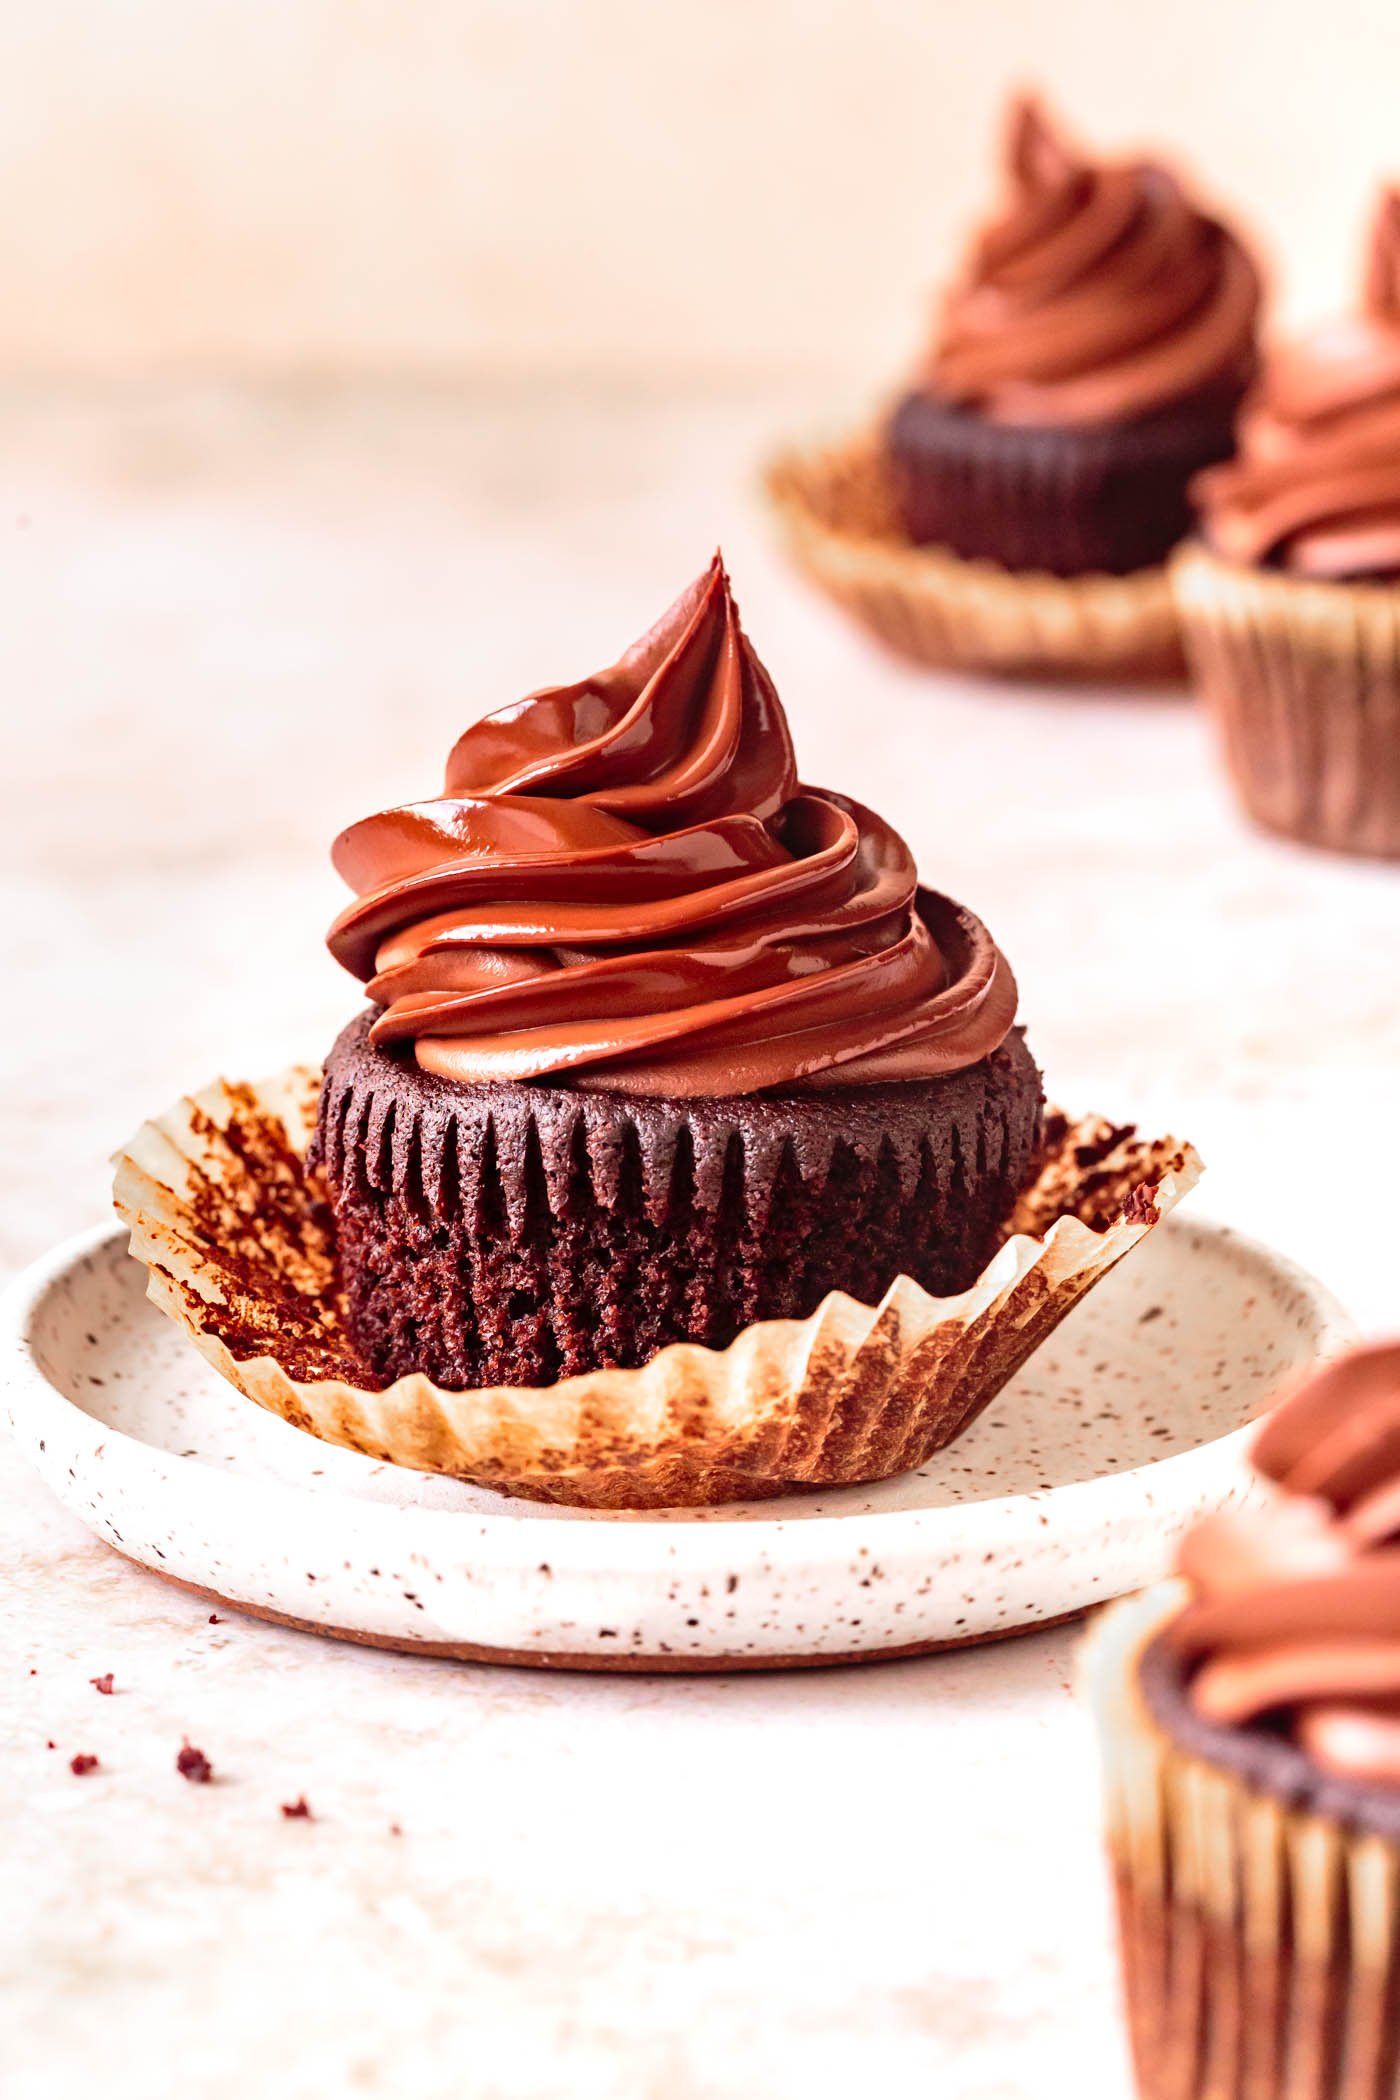 four chocolate cupcakes topped with glossy ganache are shown from the side on a warm speckled surface